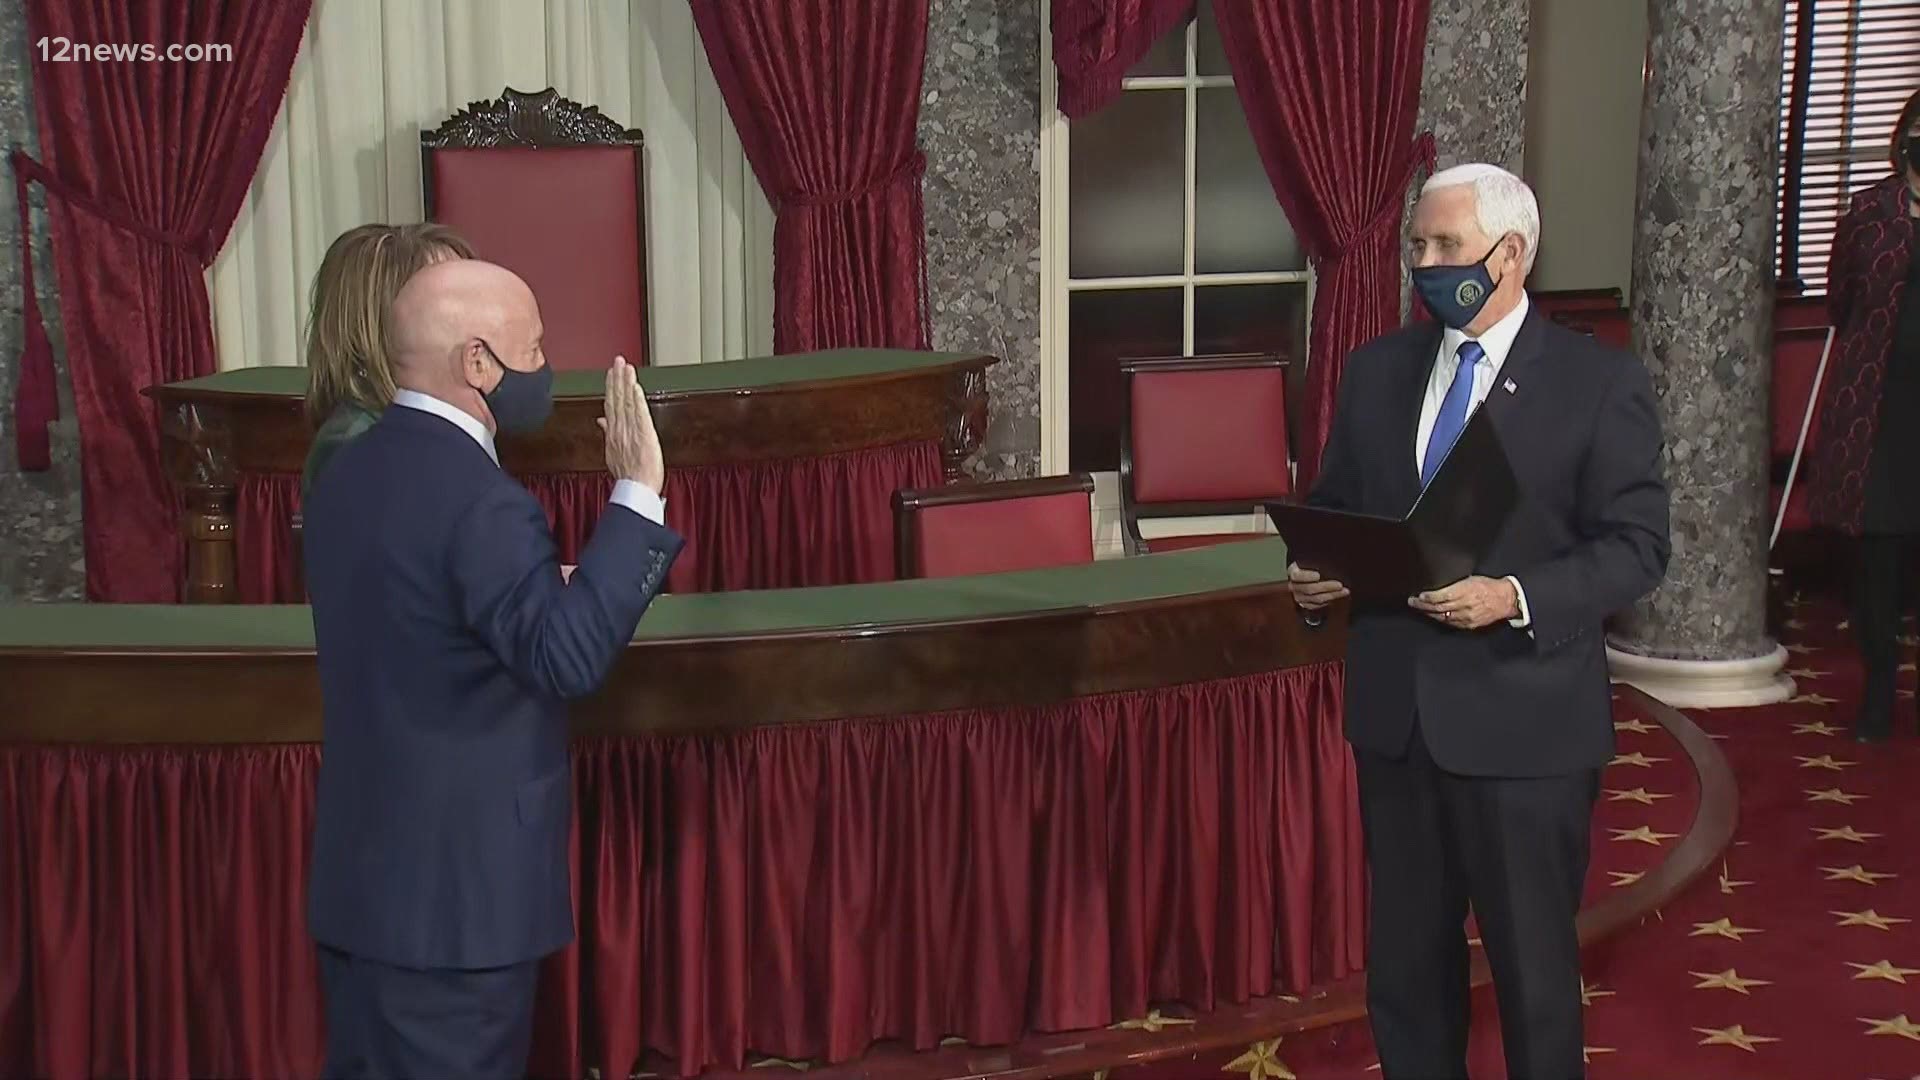 Mark Kelly was sworn in to the United States Senate on Wednesday afternoon. The Democrat won the race for Arizona's U.S. Senate seat against Republian Martha McSally